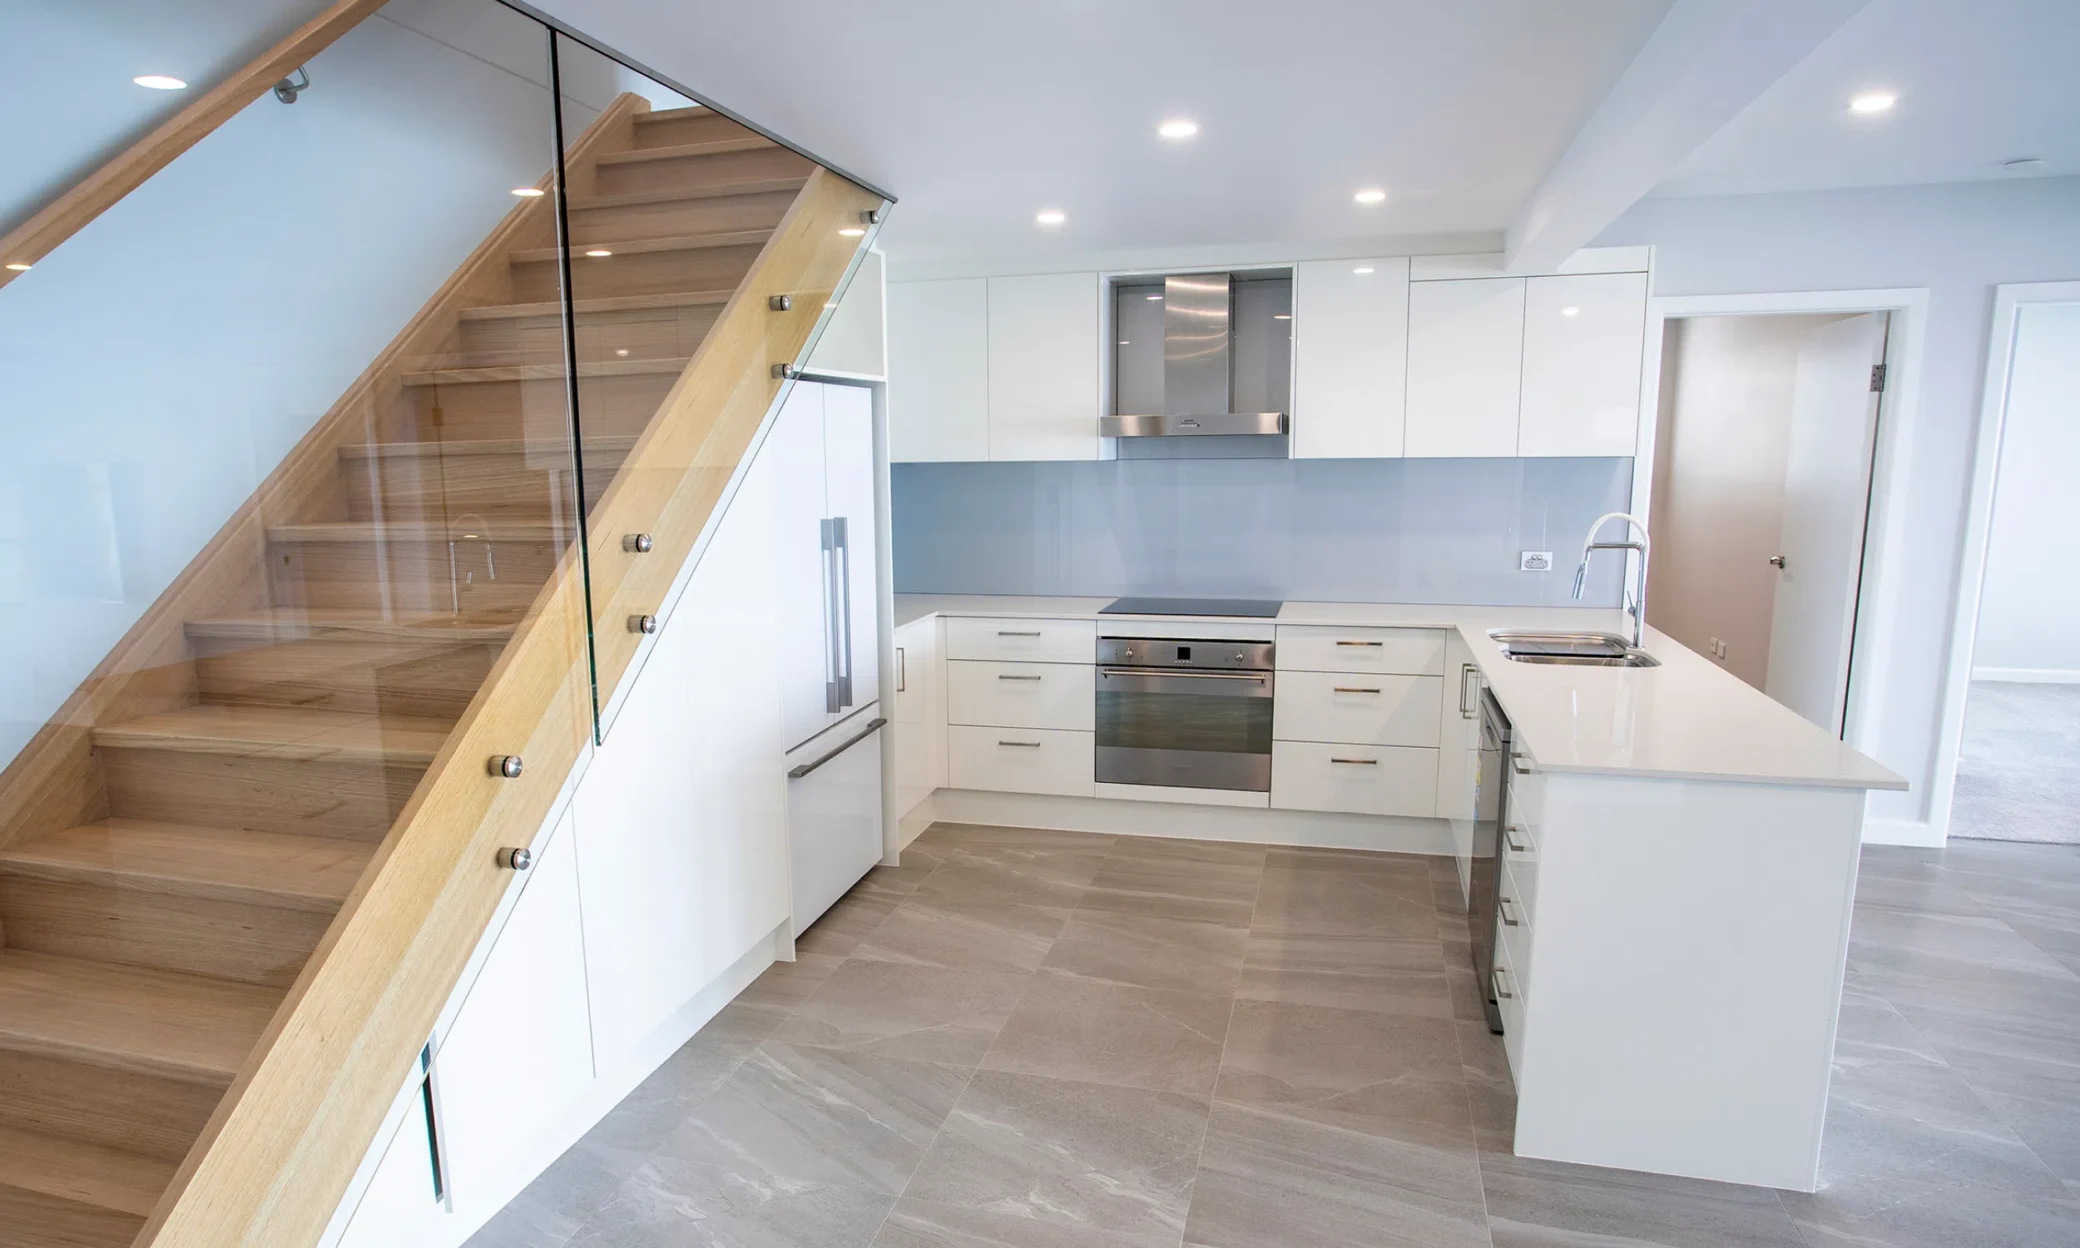 A modern kitchen with white cabinets and a central island next to a wooden staircase with glass railings, featuring built-in appliances and blue backsplash. Light gray tiled flooring extends throughout the Newcastle space.